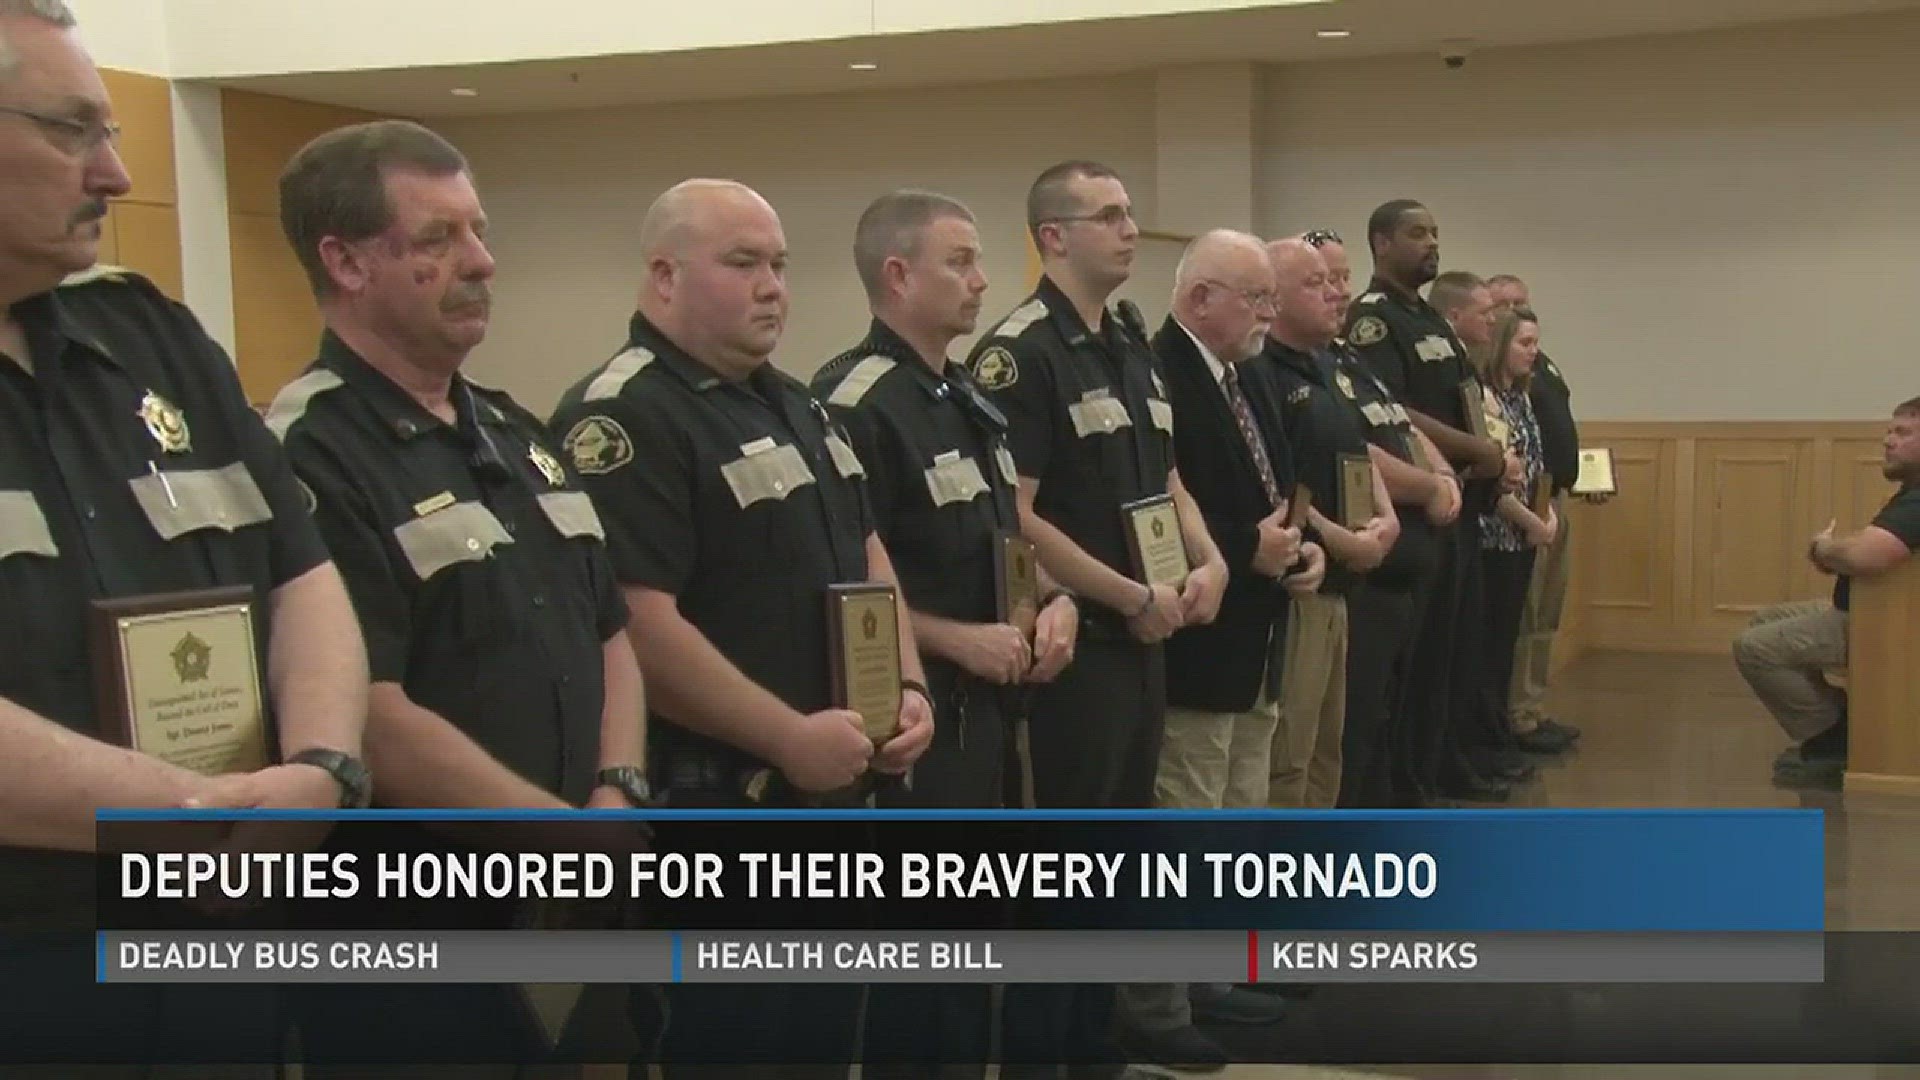 March 29, 2017: Four months after an EF-2 tornado tore through McMinn County, several McMinn County Sheriff's Office deputies are being honored for their actions during the devastation.